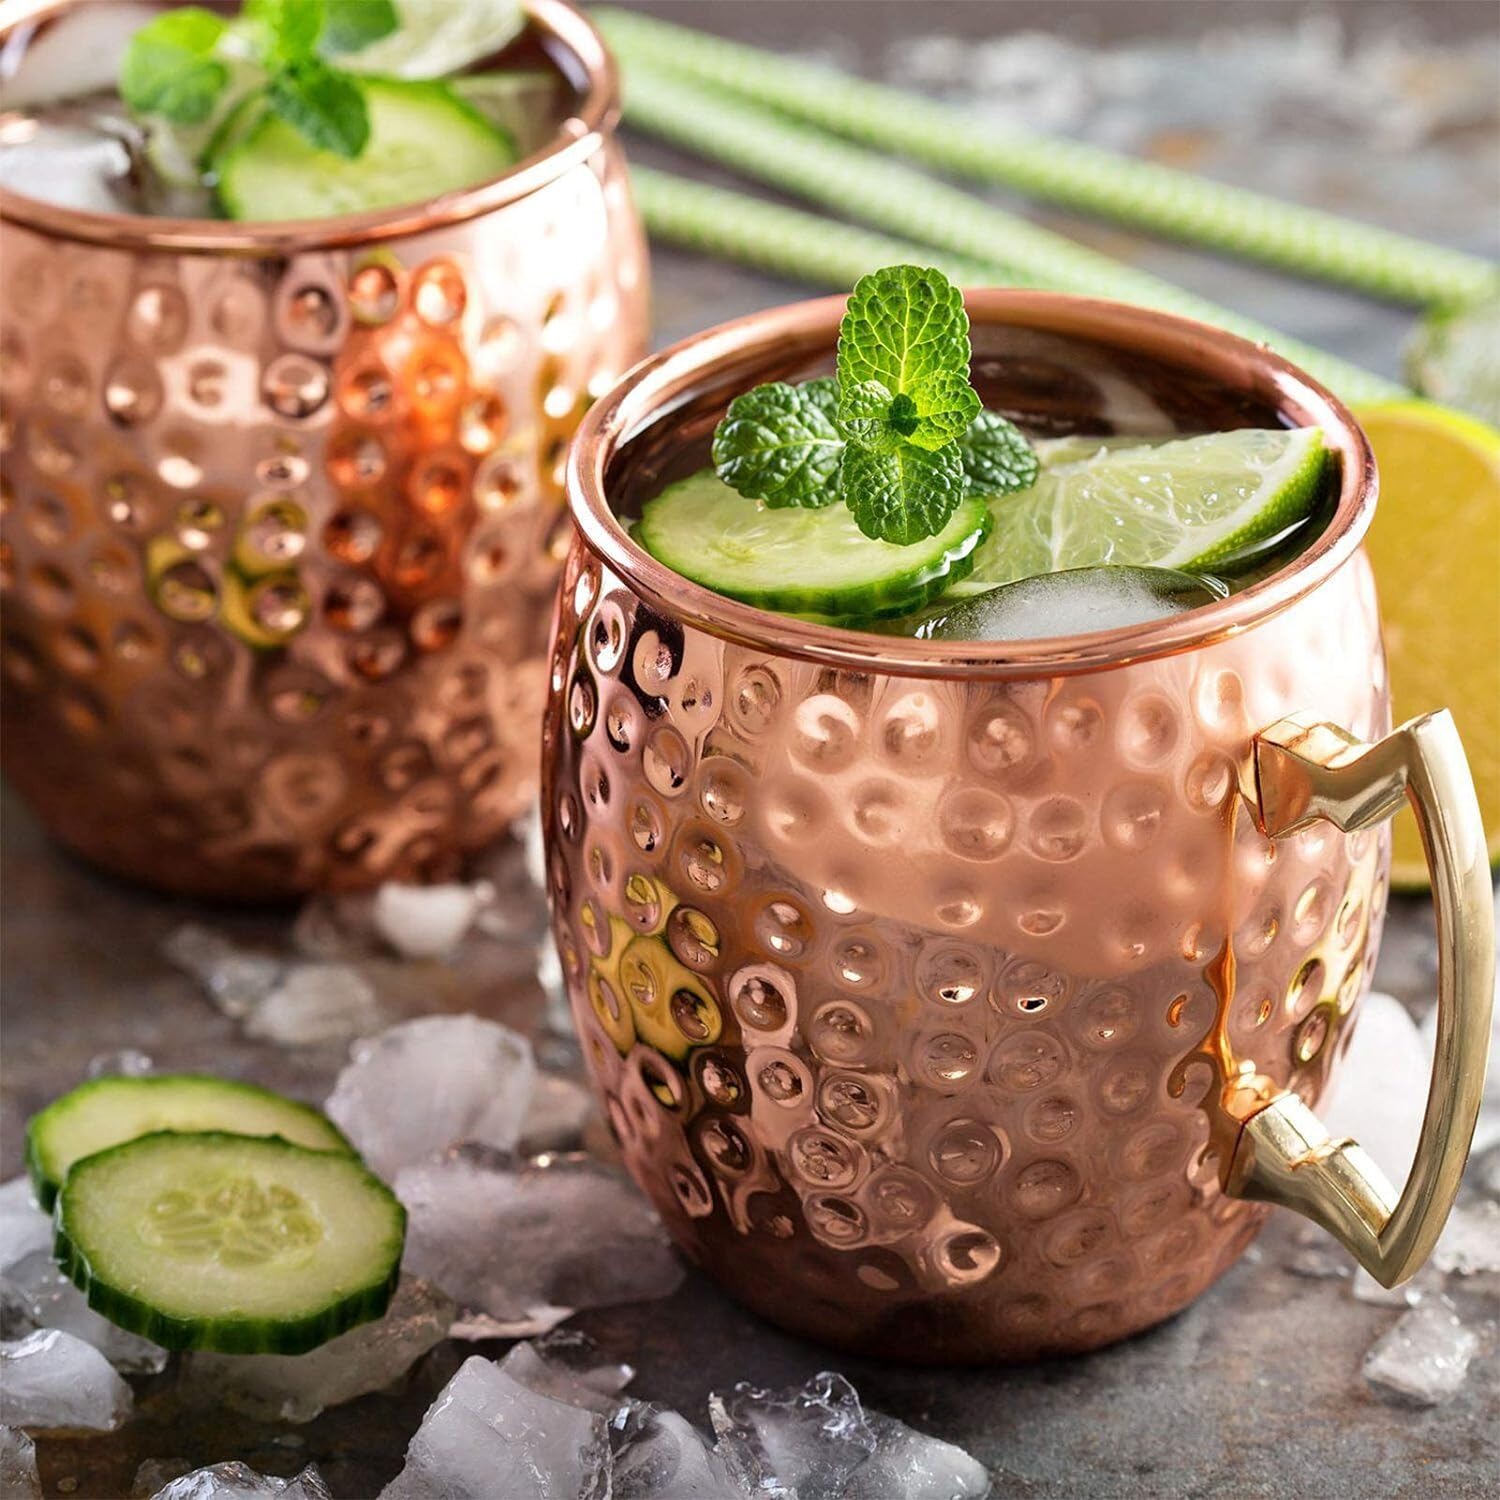 LIVEHITOP Moscow Mule Copper Mugs Set of 2 PC,19.5 Oz Copper Cup with Coasters for Cocktail, Wine, Beer, Cold Drink, Home, Bar, Party, Gifts (Pack of 2)